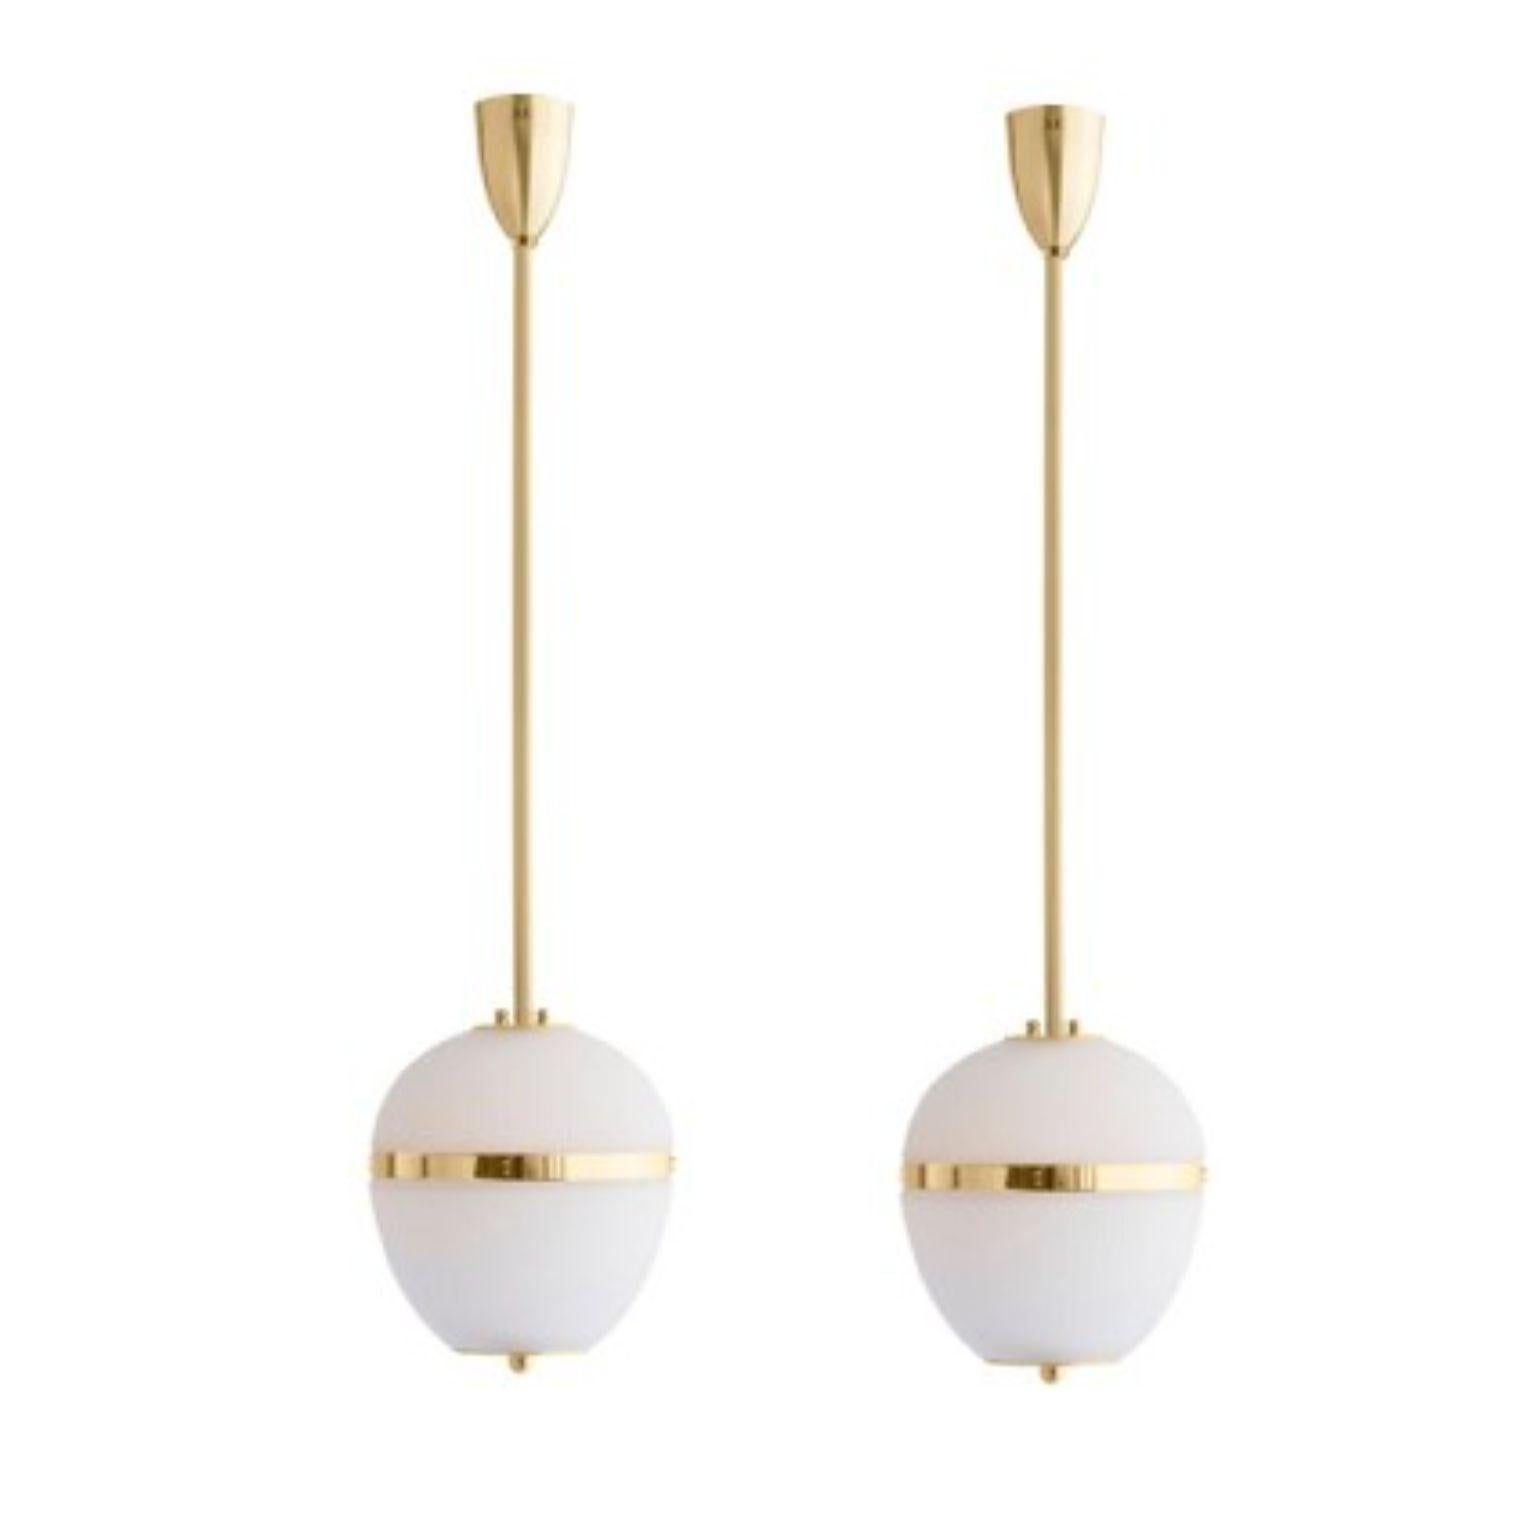 Pendant China 02 by Magic Circus Editions
Dimensions: H 90 x W 32 x D 32 cm, also available in H 110, 130, 150, 175, 190 cm
Materials: Brass, mouth blown glass sculpted with a diamond saw
Colour: enamel soft white

Available finishes: Brass,